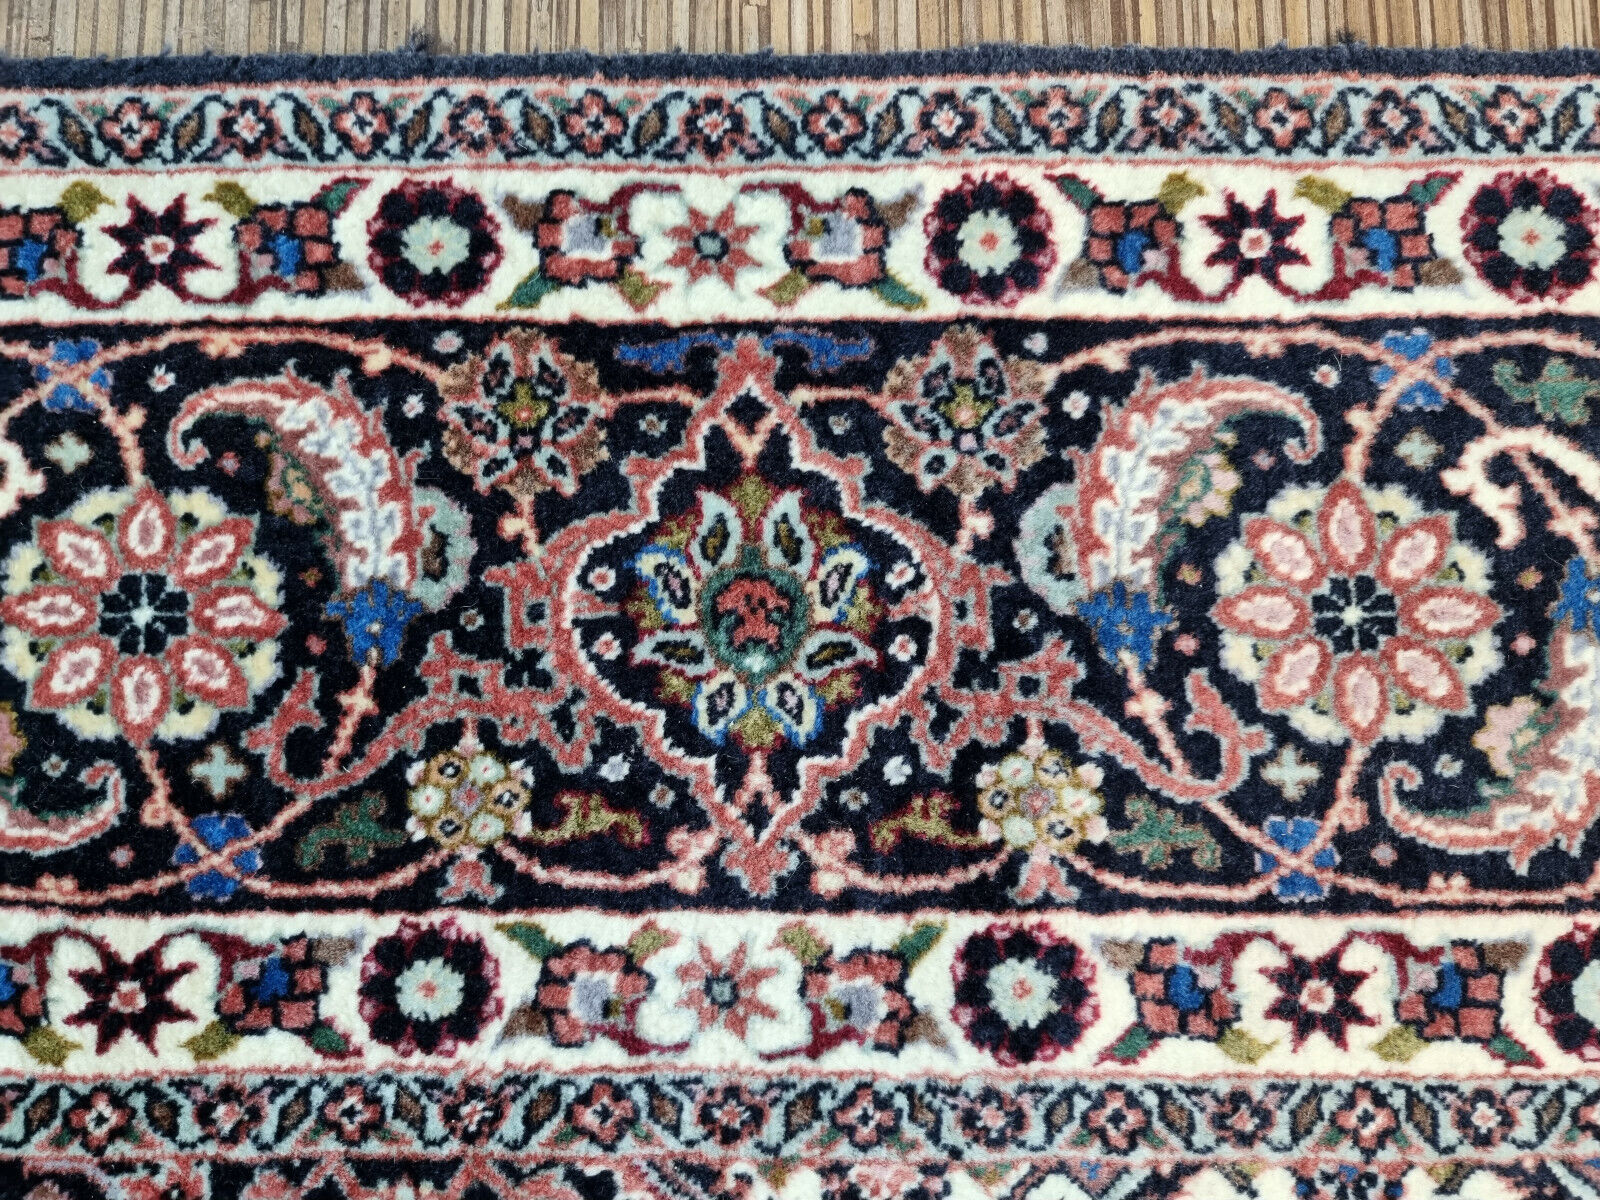 Close-up of captivating diamond-shaped central motif on Handmade Vintage Persian Bidjar Rug - Detailed view highlighting the central design element of the rug.